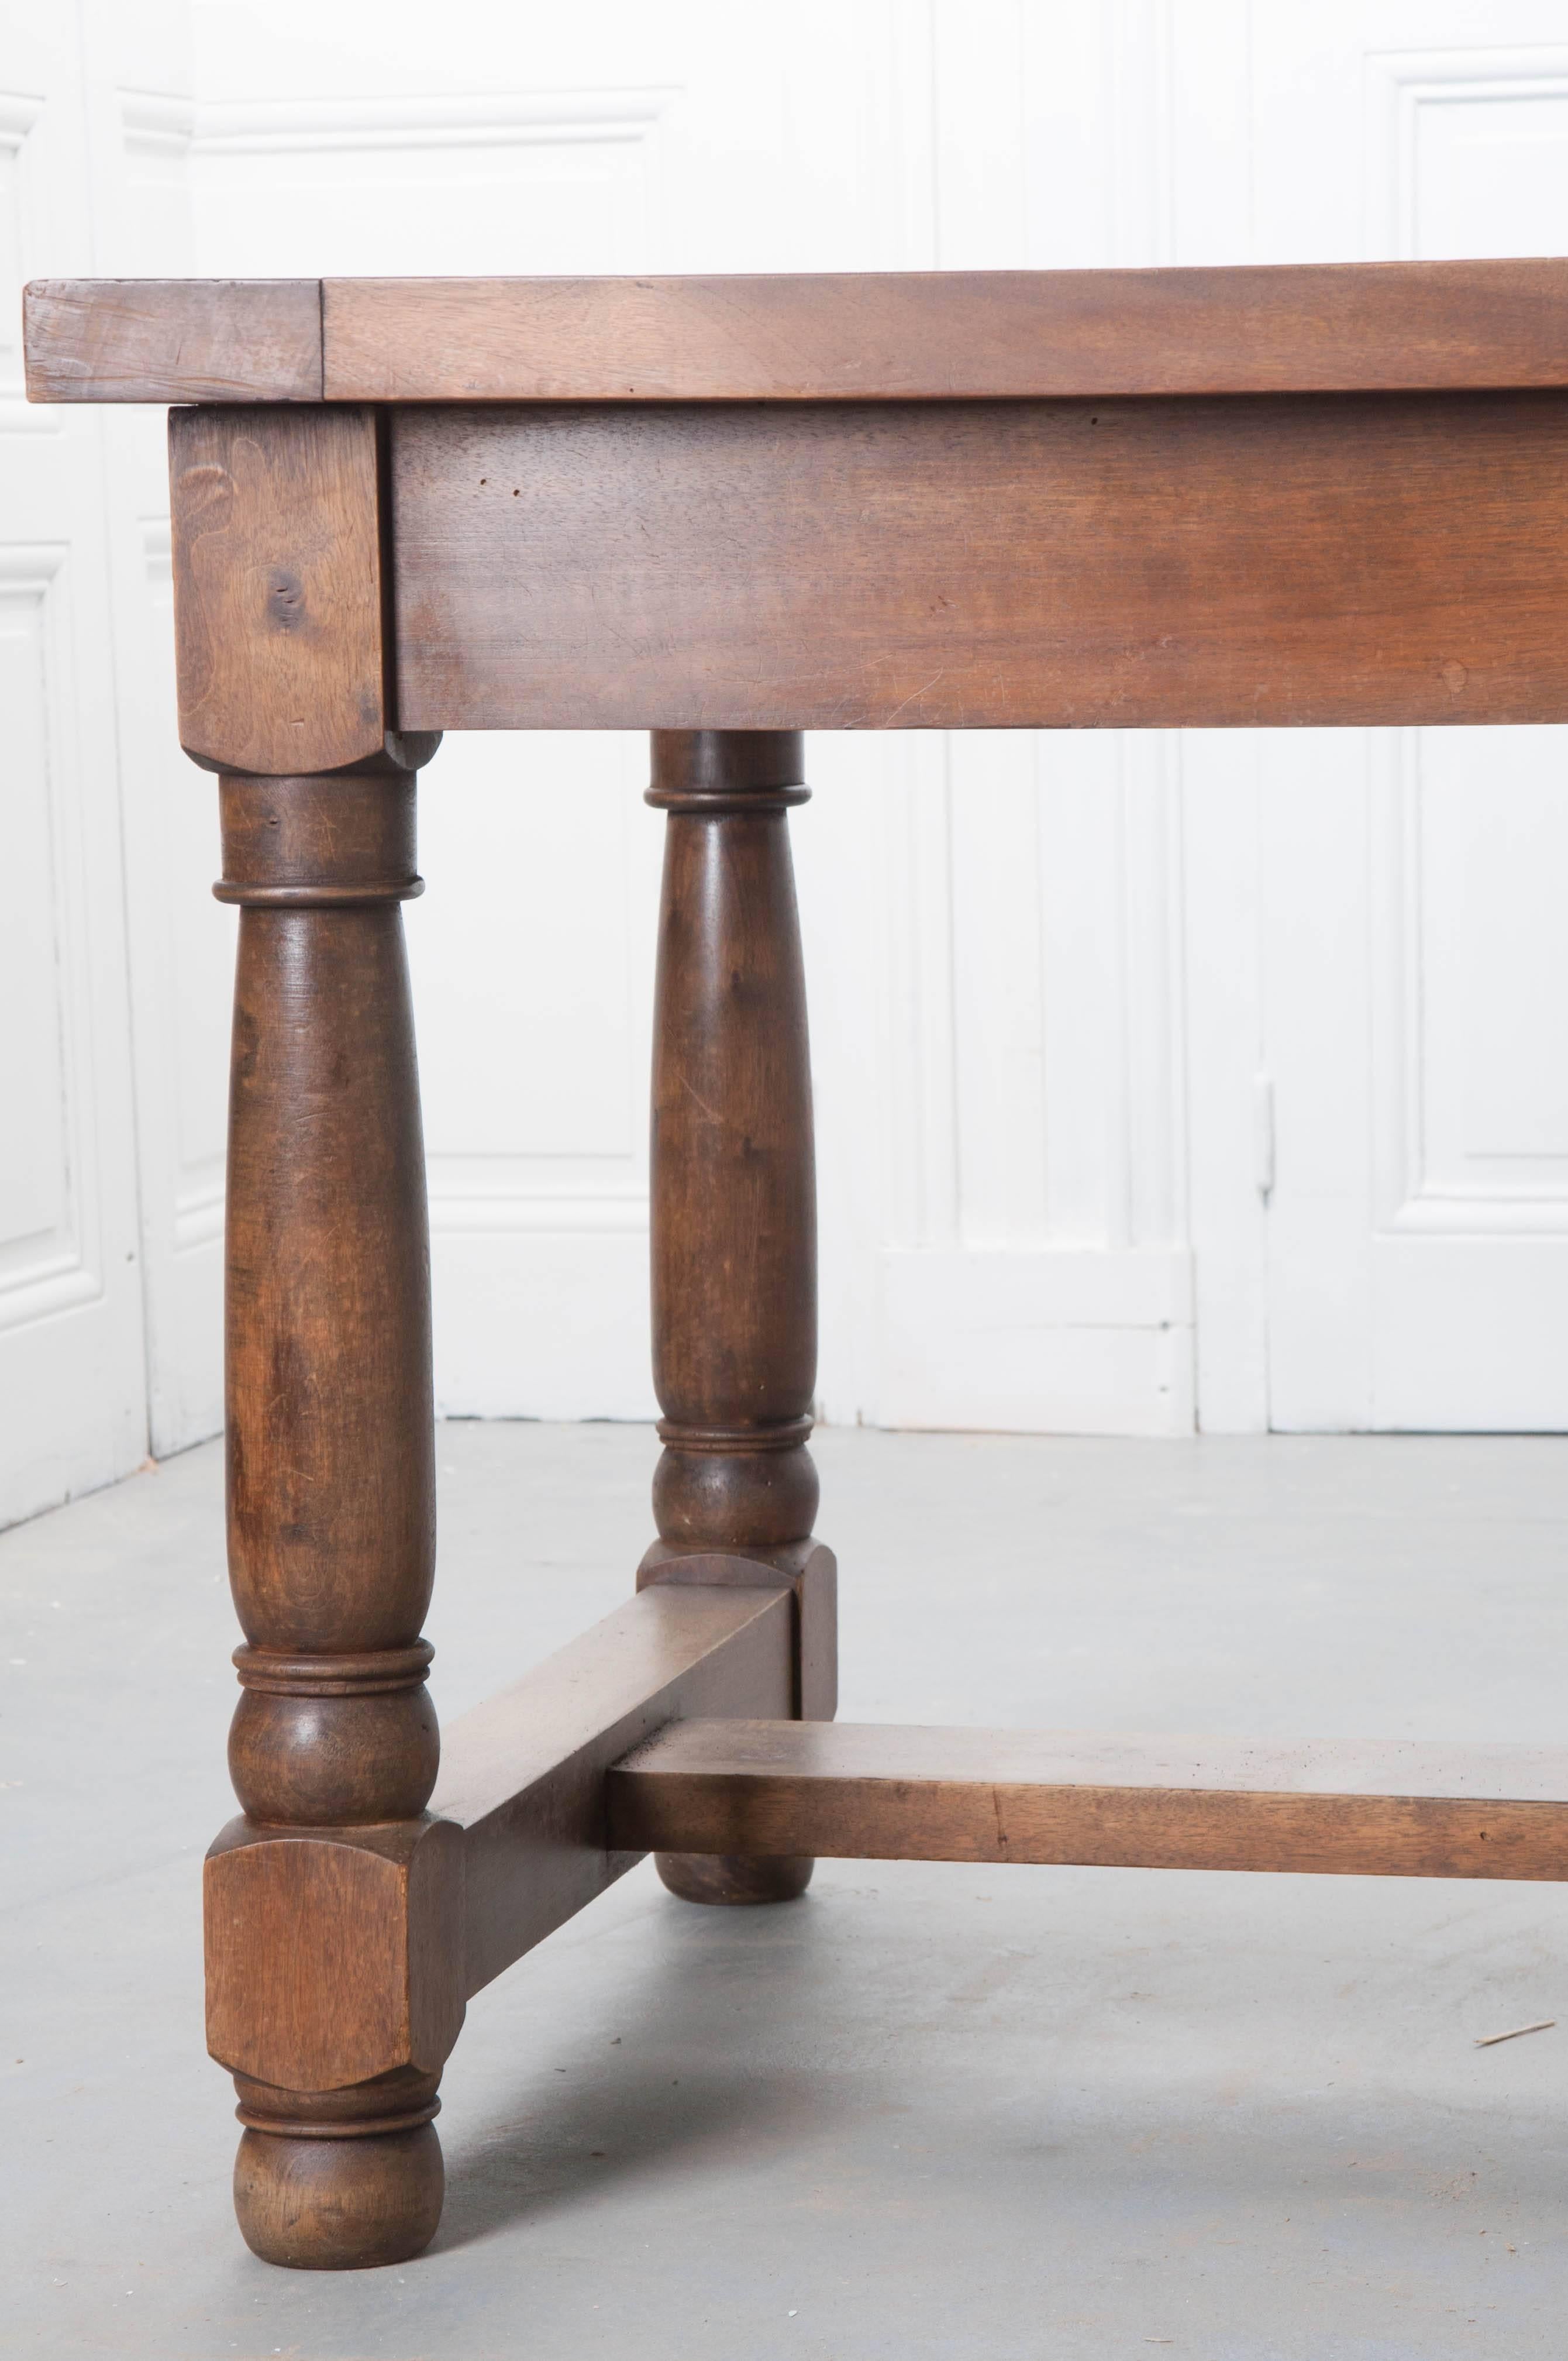 A thick, solid oak 19th century farm table from Southern France. Impeccable patina envelops the beautifully toned and aged, sturdy walnut. Three drawers are located in the apron, providing out of sight storage. The drawers all have antique scrolled